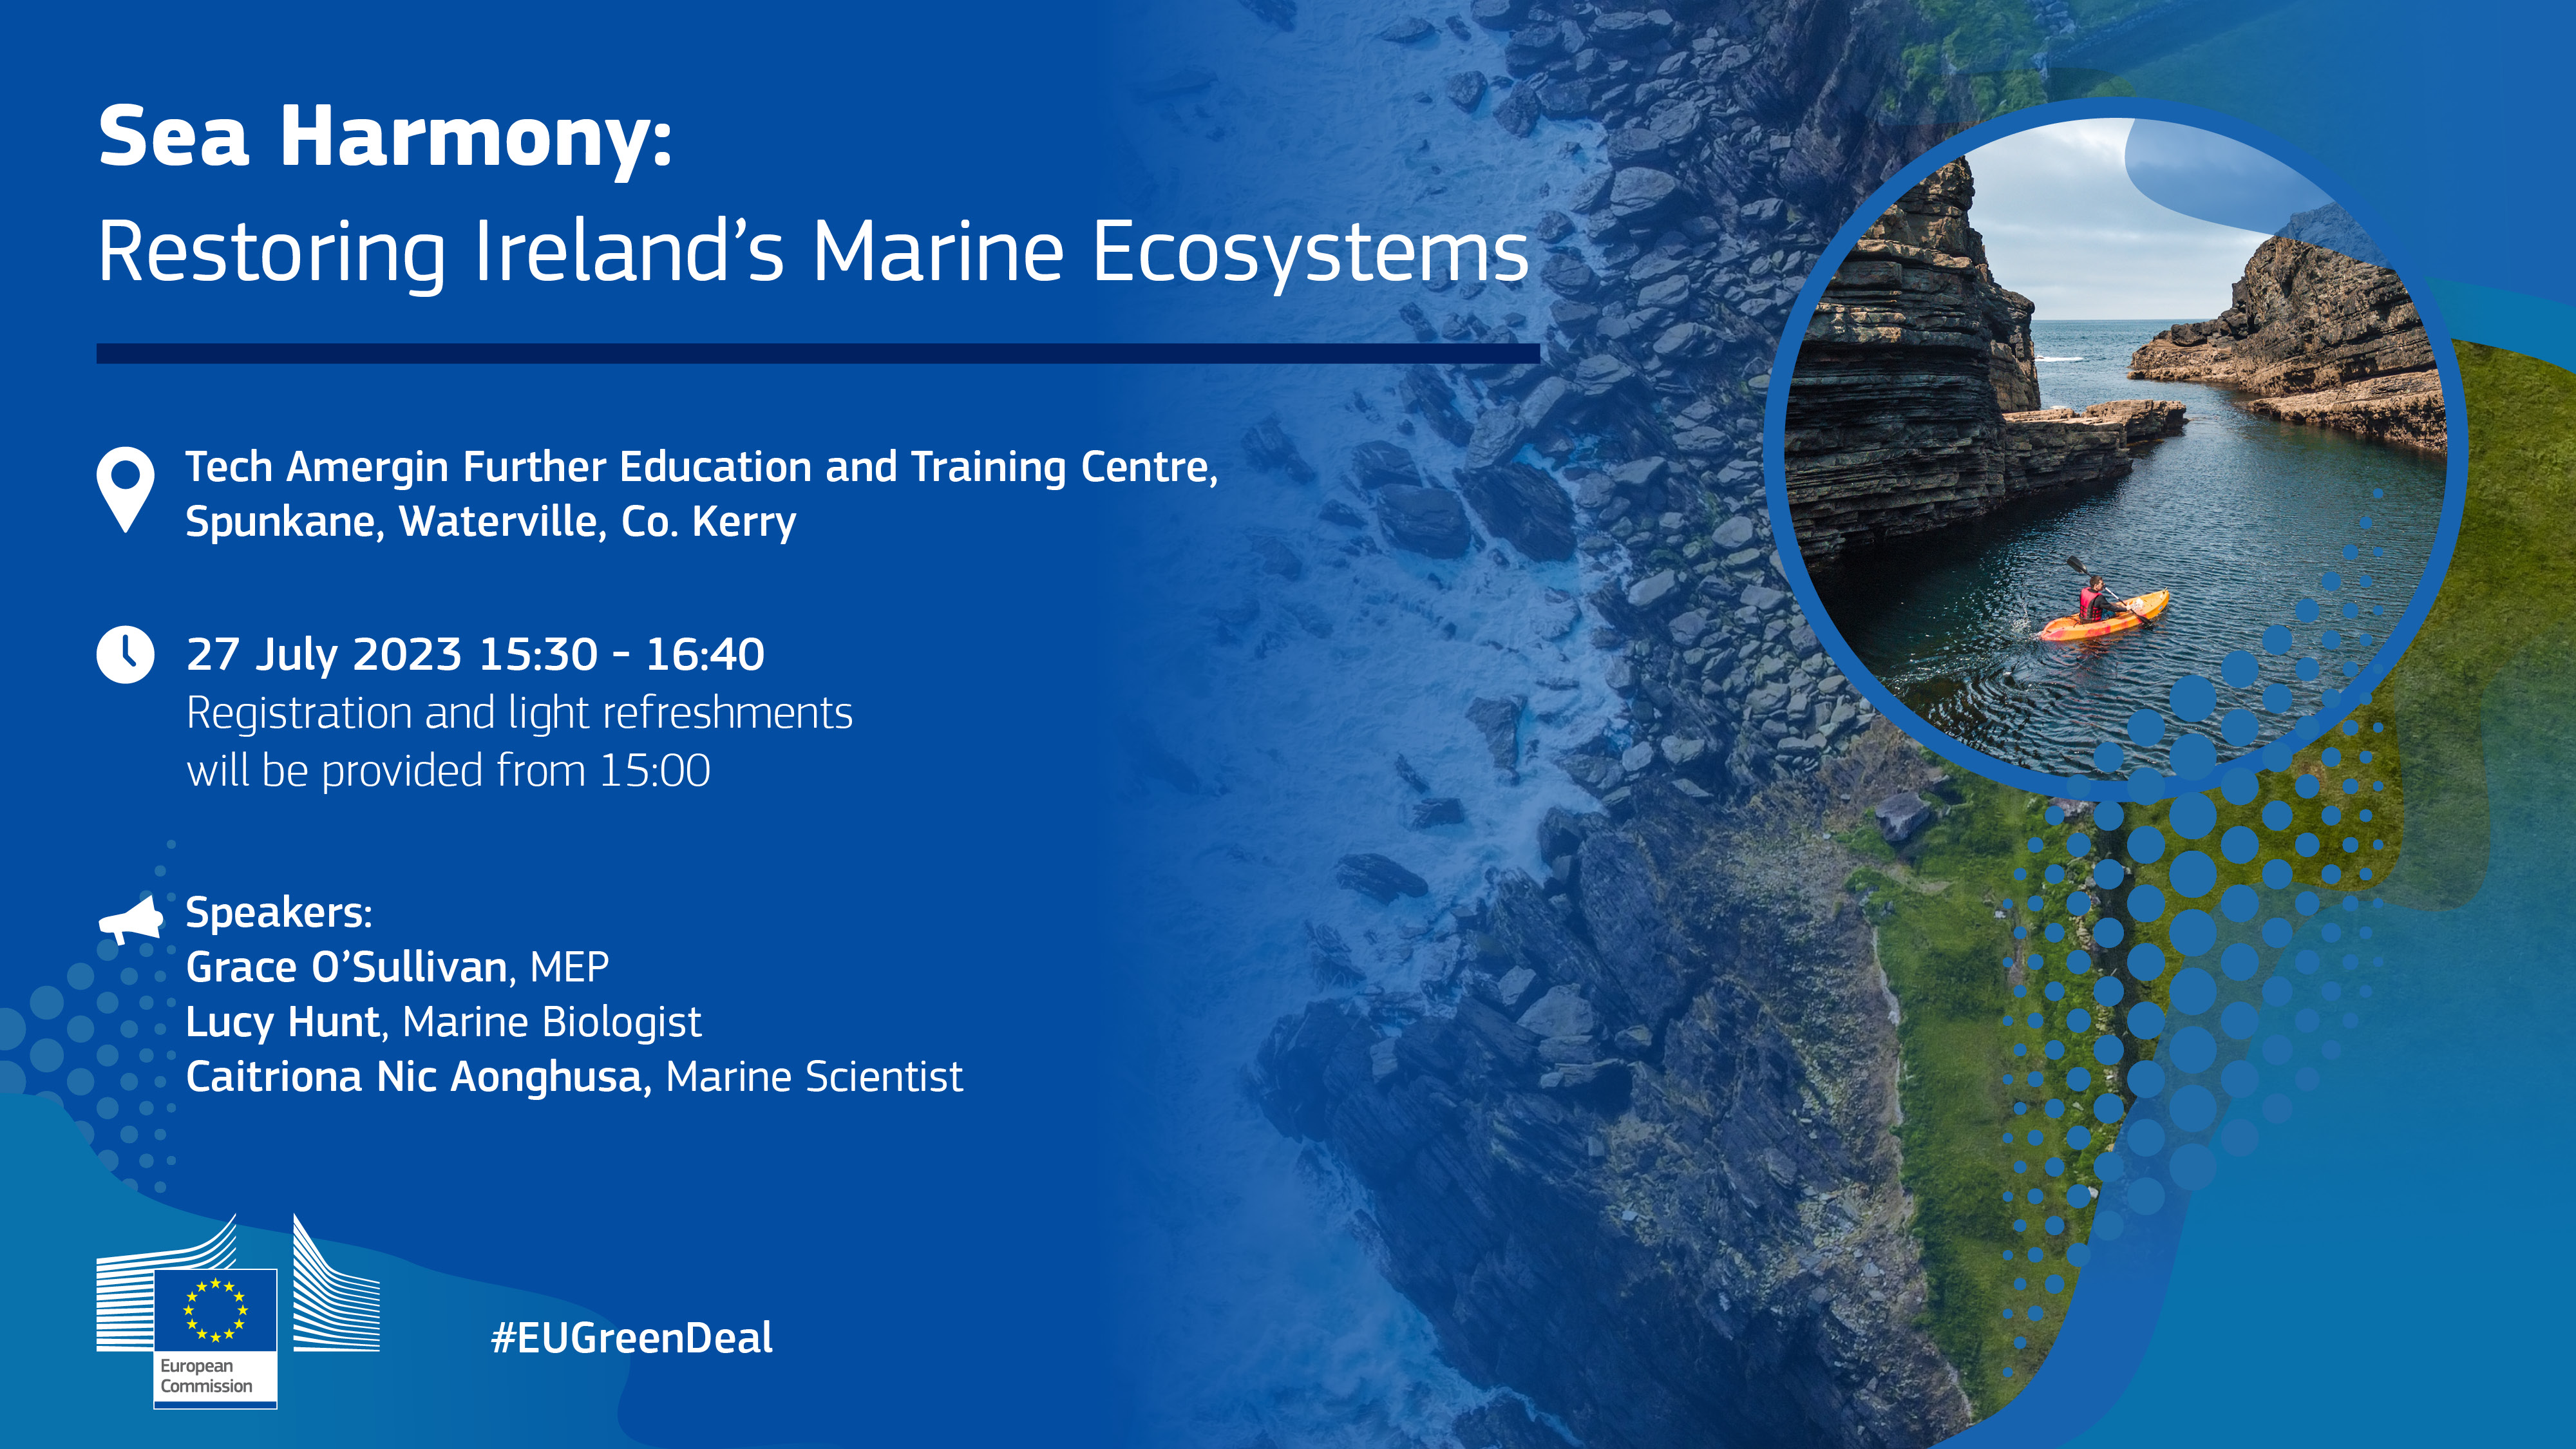 Visual with image of of kayaker and text: Sea Harmony: Restoring Ireland' marine ecosystems followed by details of the venue and speakers 